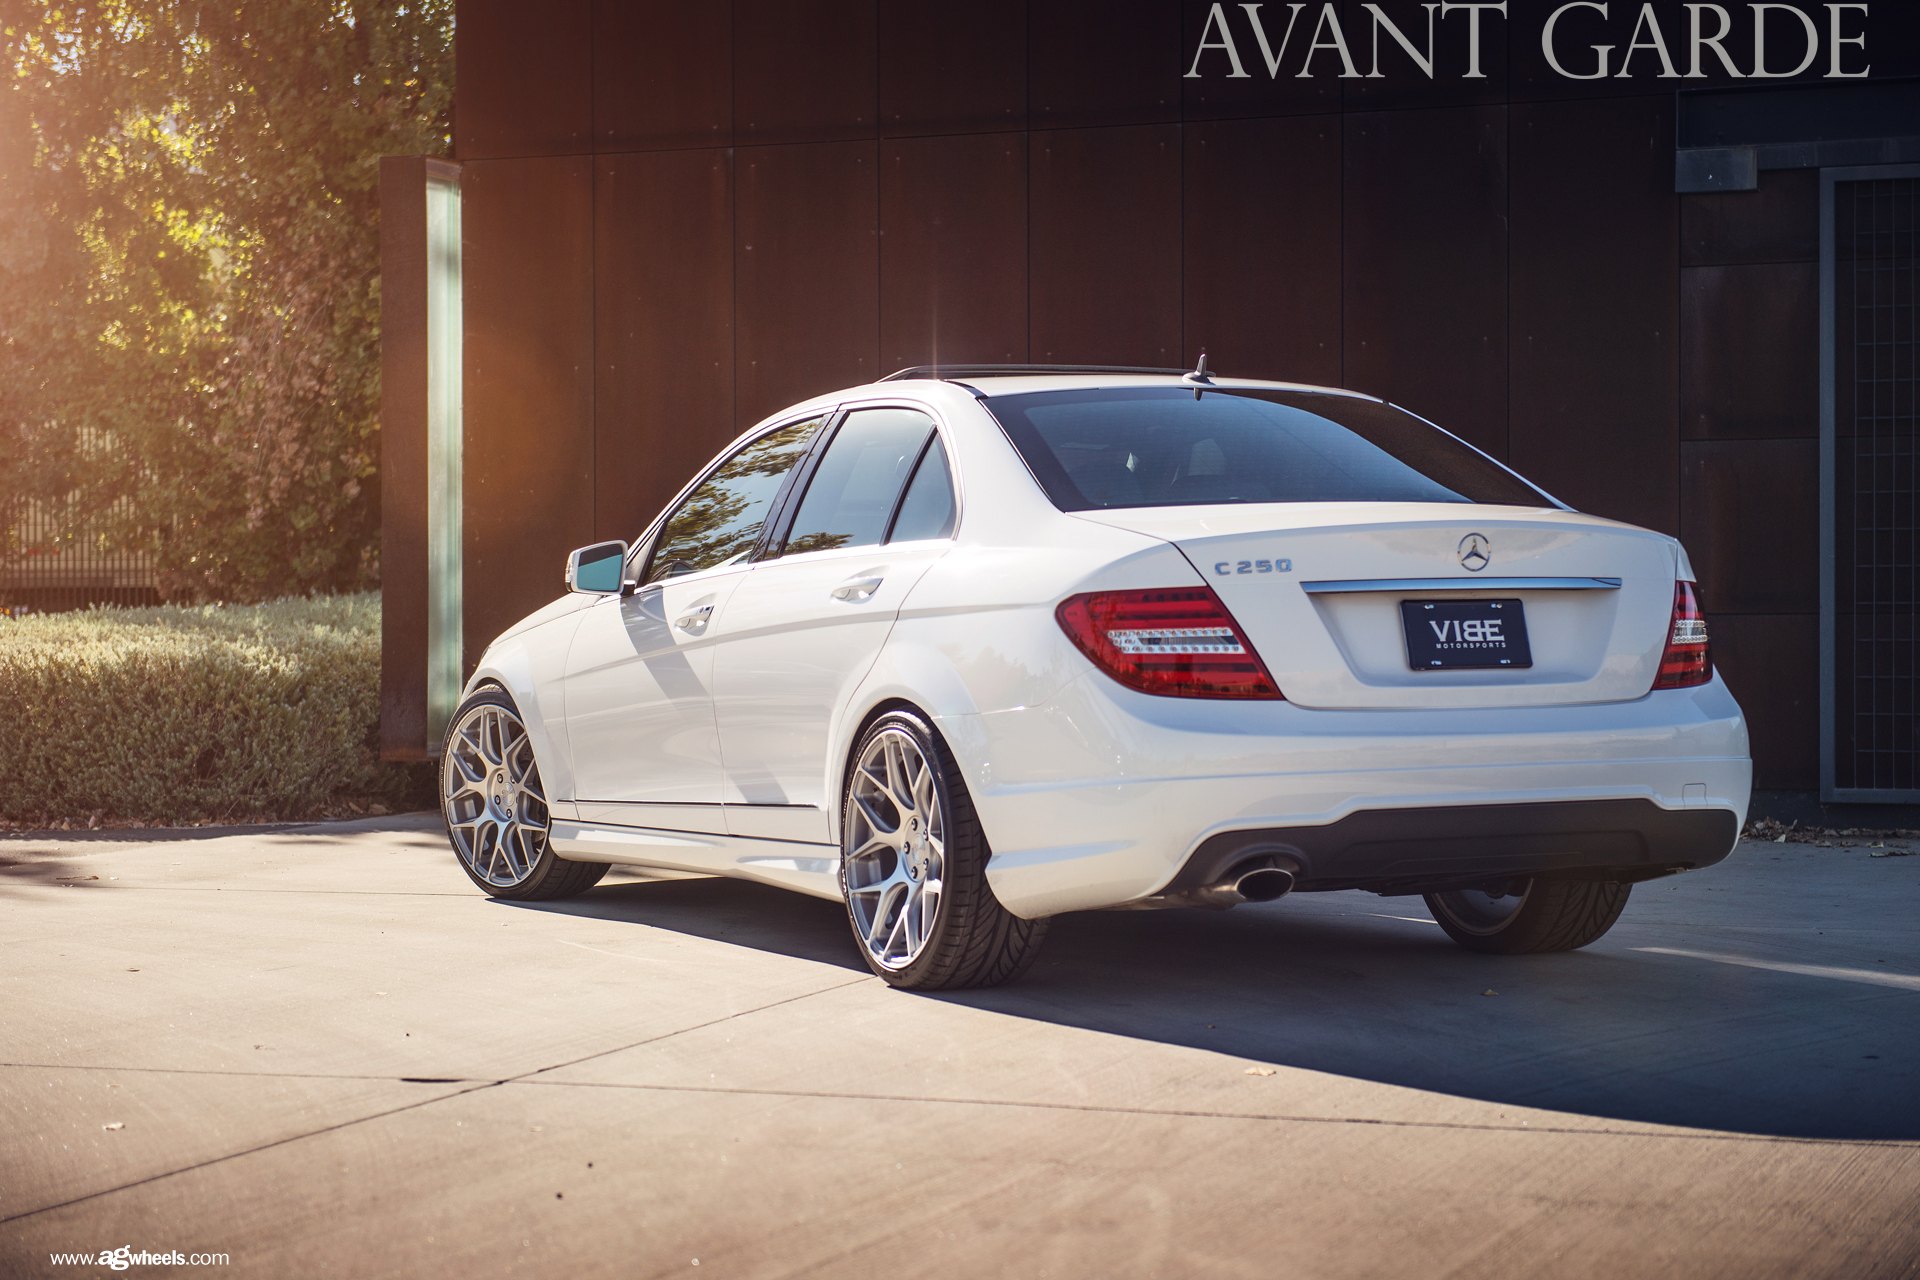 Red LED Taillights on White Mercedes C Class - Photo by Avant Garde Wheels